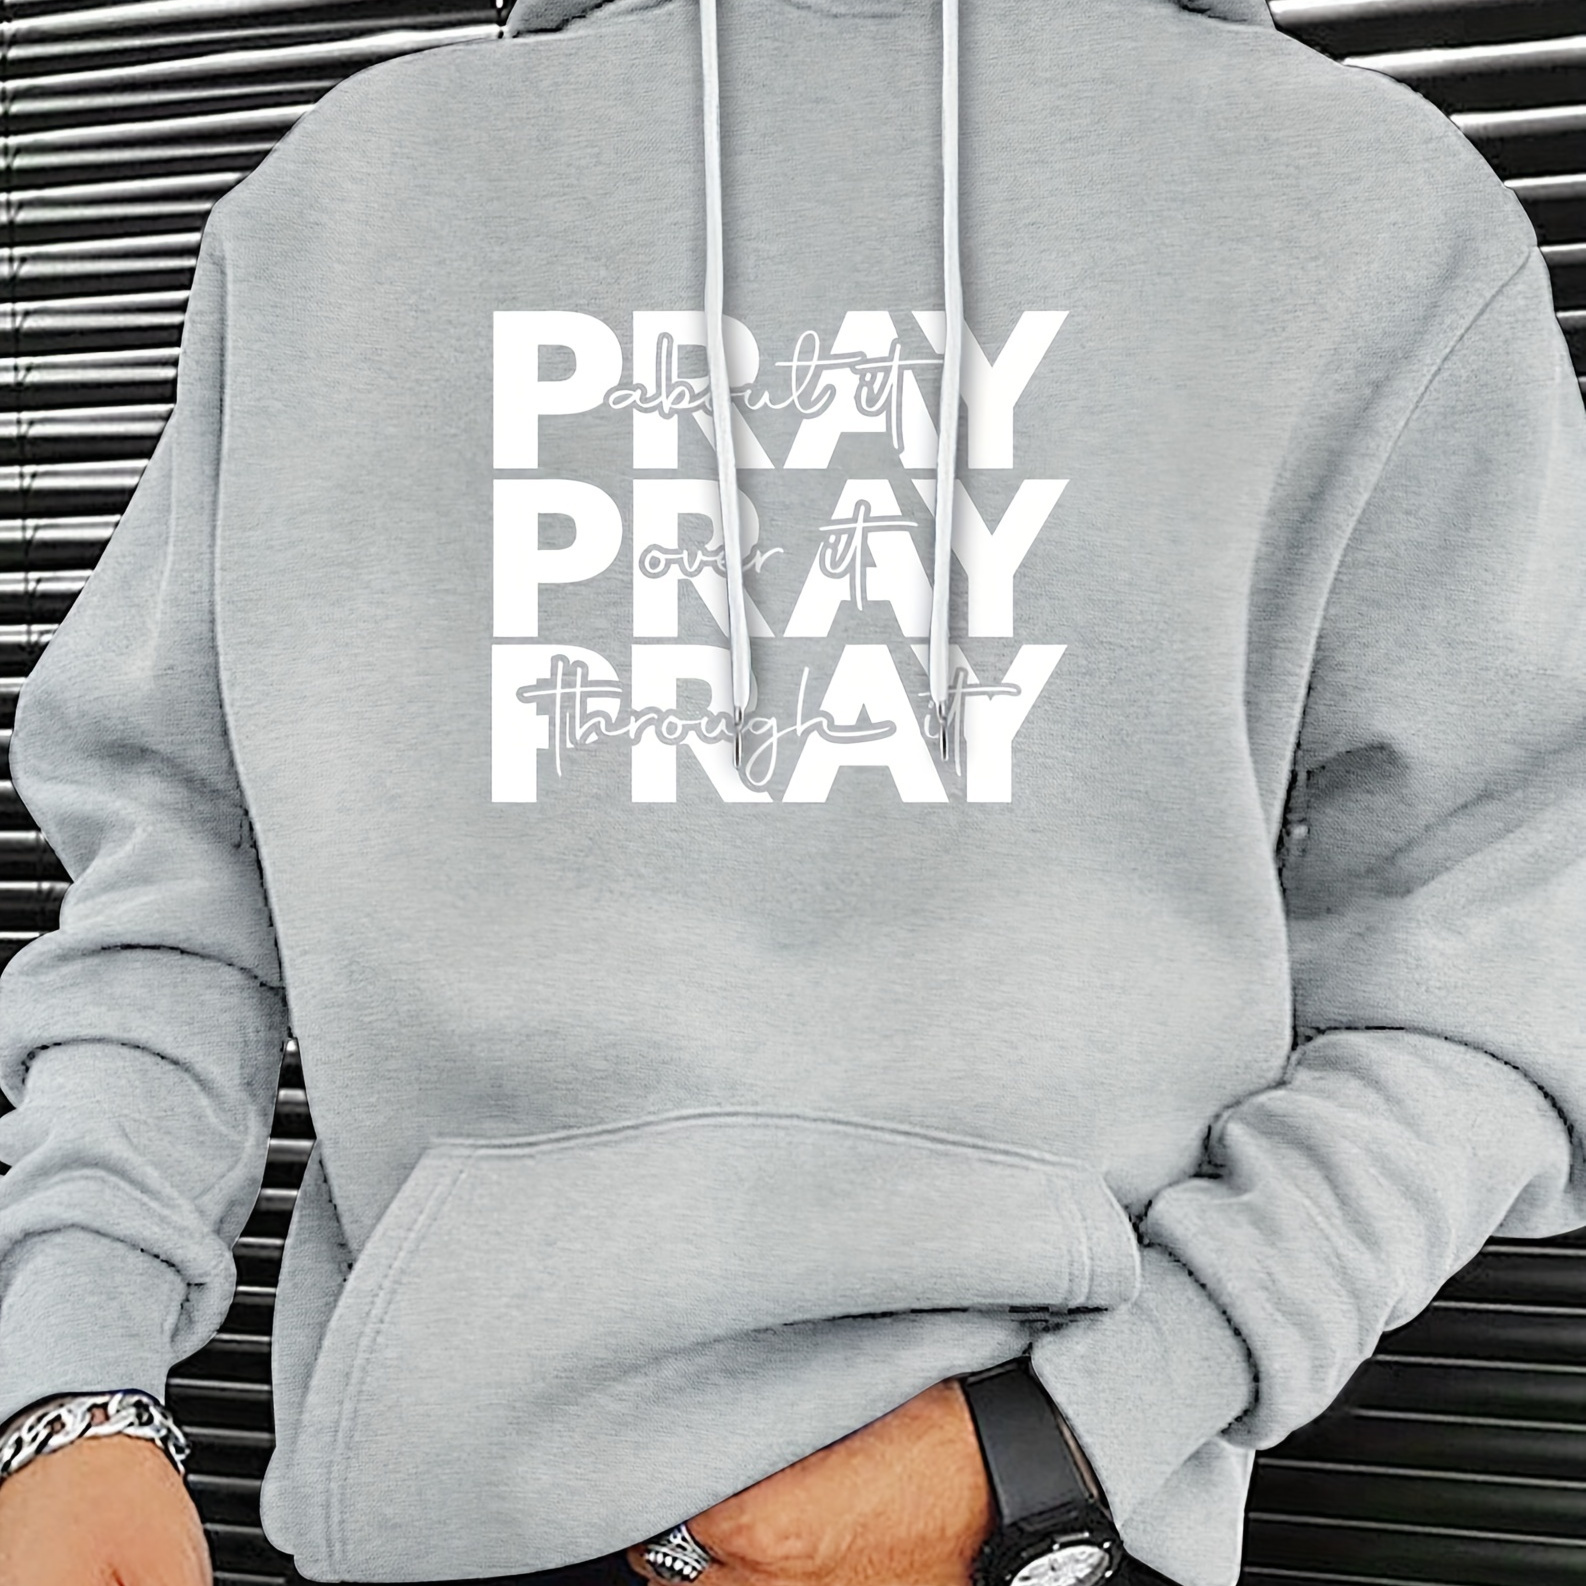 

pray" Print, Hoodies For Men, Graphic Sweatshirt With Kangaroo Pocket, Comfy Trendy Hooded Pullover, Mens Clothing For Fall Winter